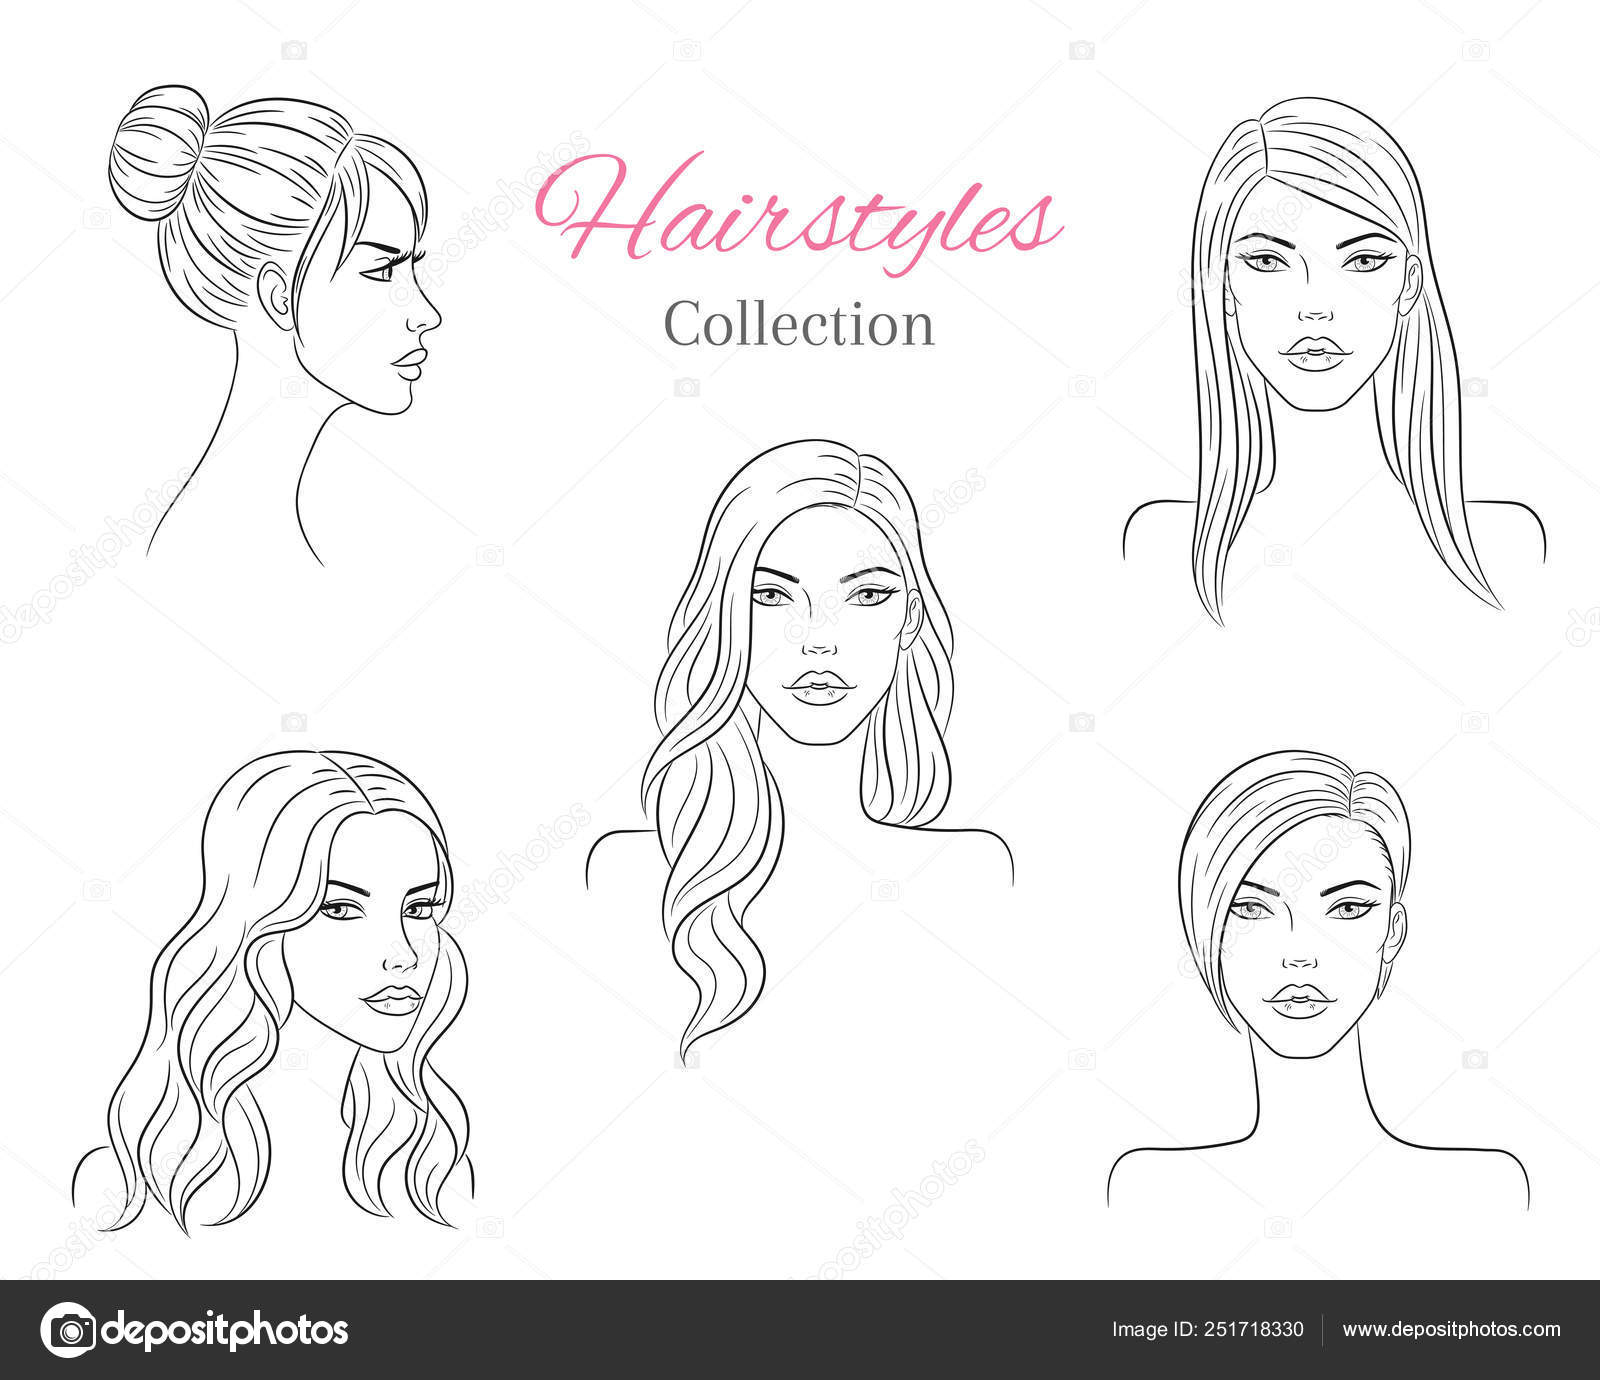 Girl With A Fashionable Hairstyle Fashion Illustration Stock Illustration -  Download Image Now - iStock